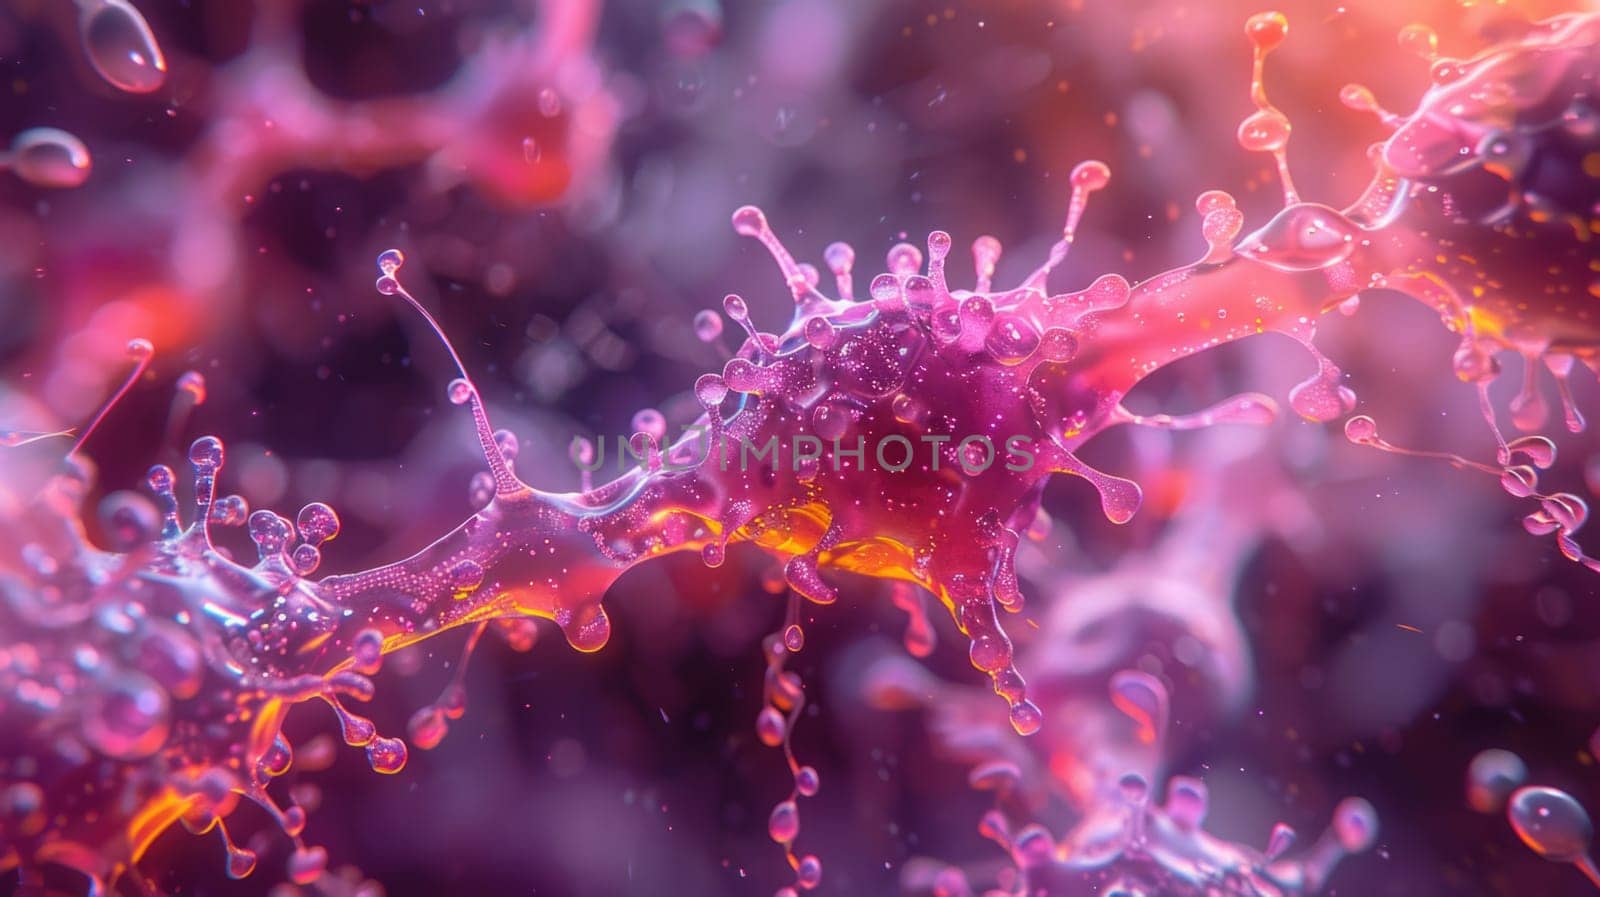 Detailed view of a cellular body displaying a pink and yellow substance, showing intricate patterns and textures.